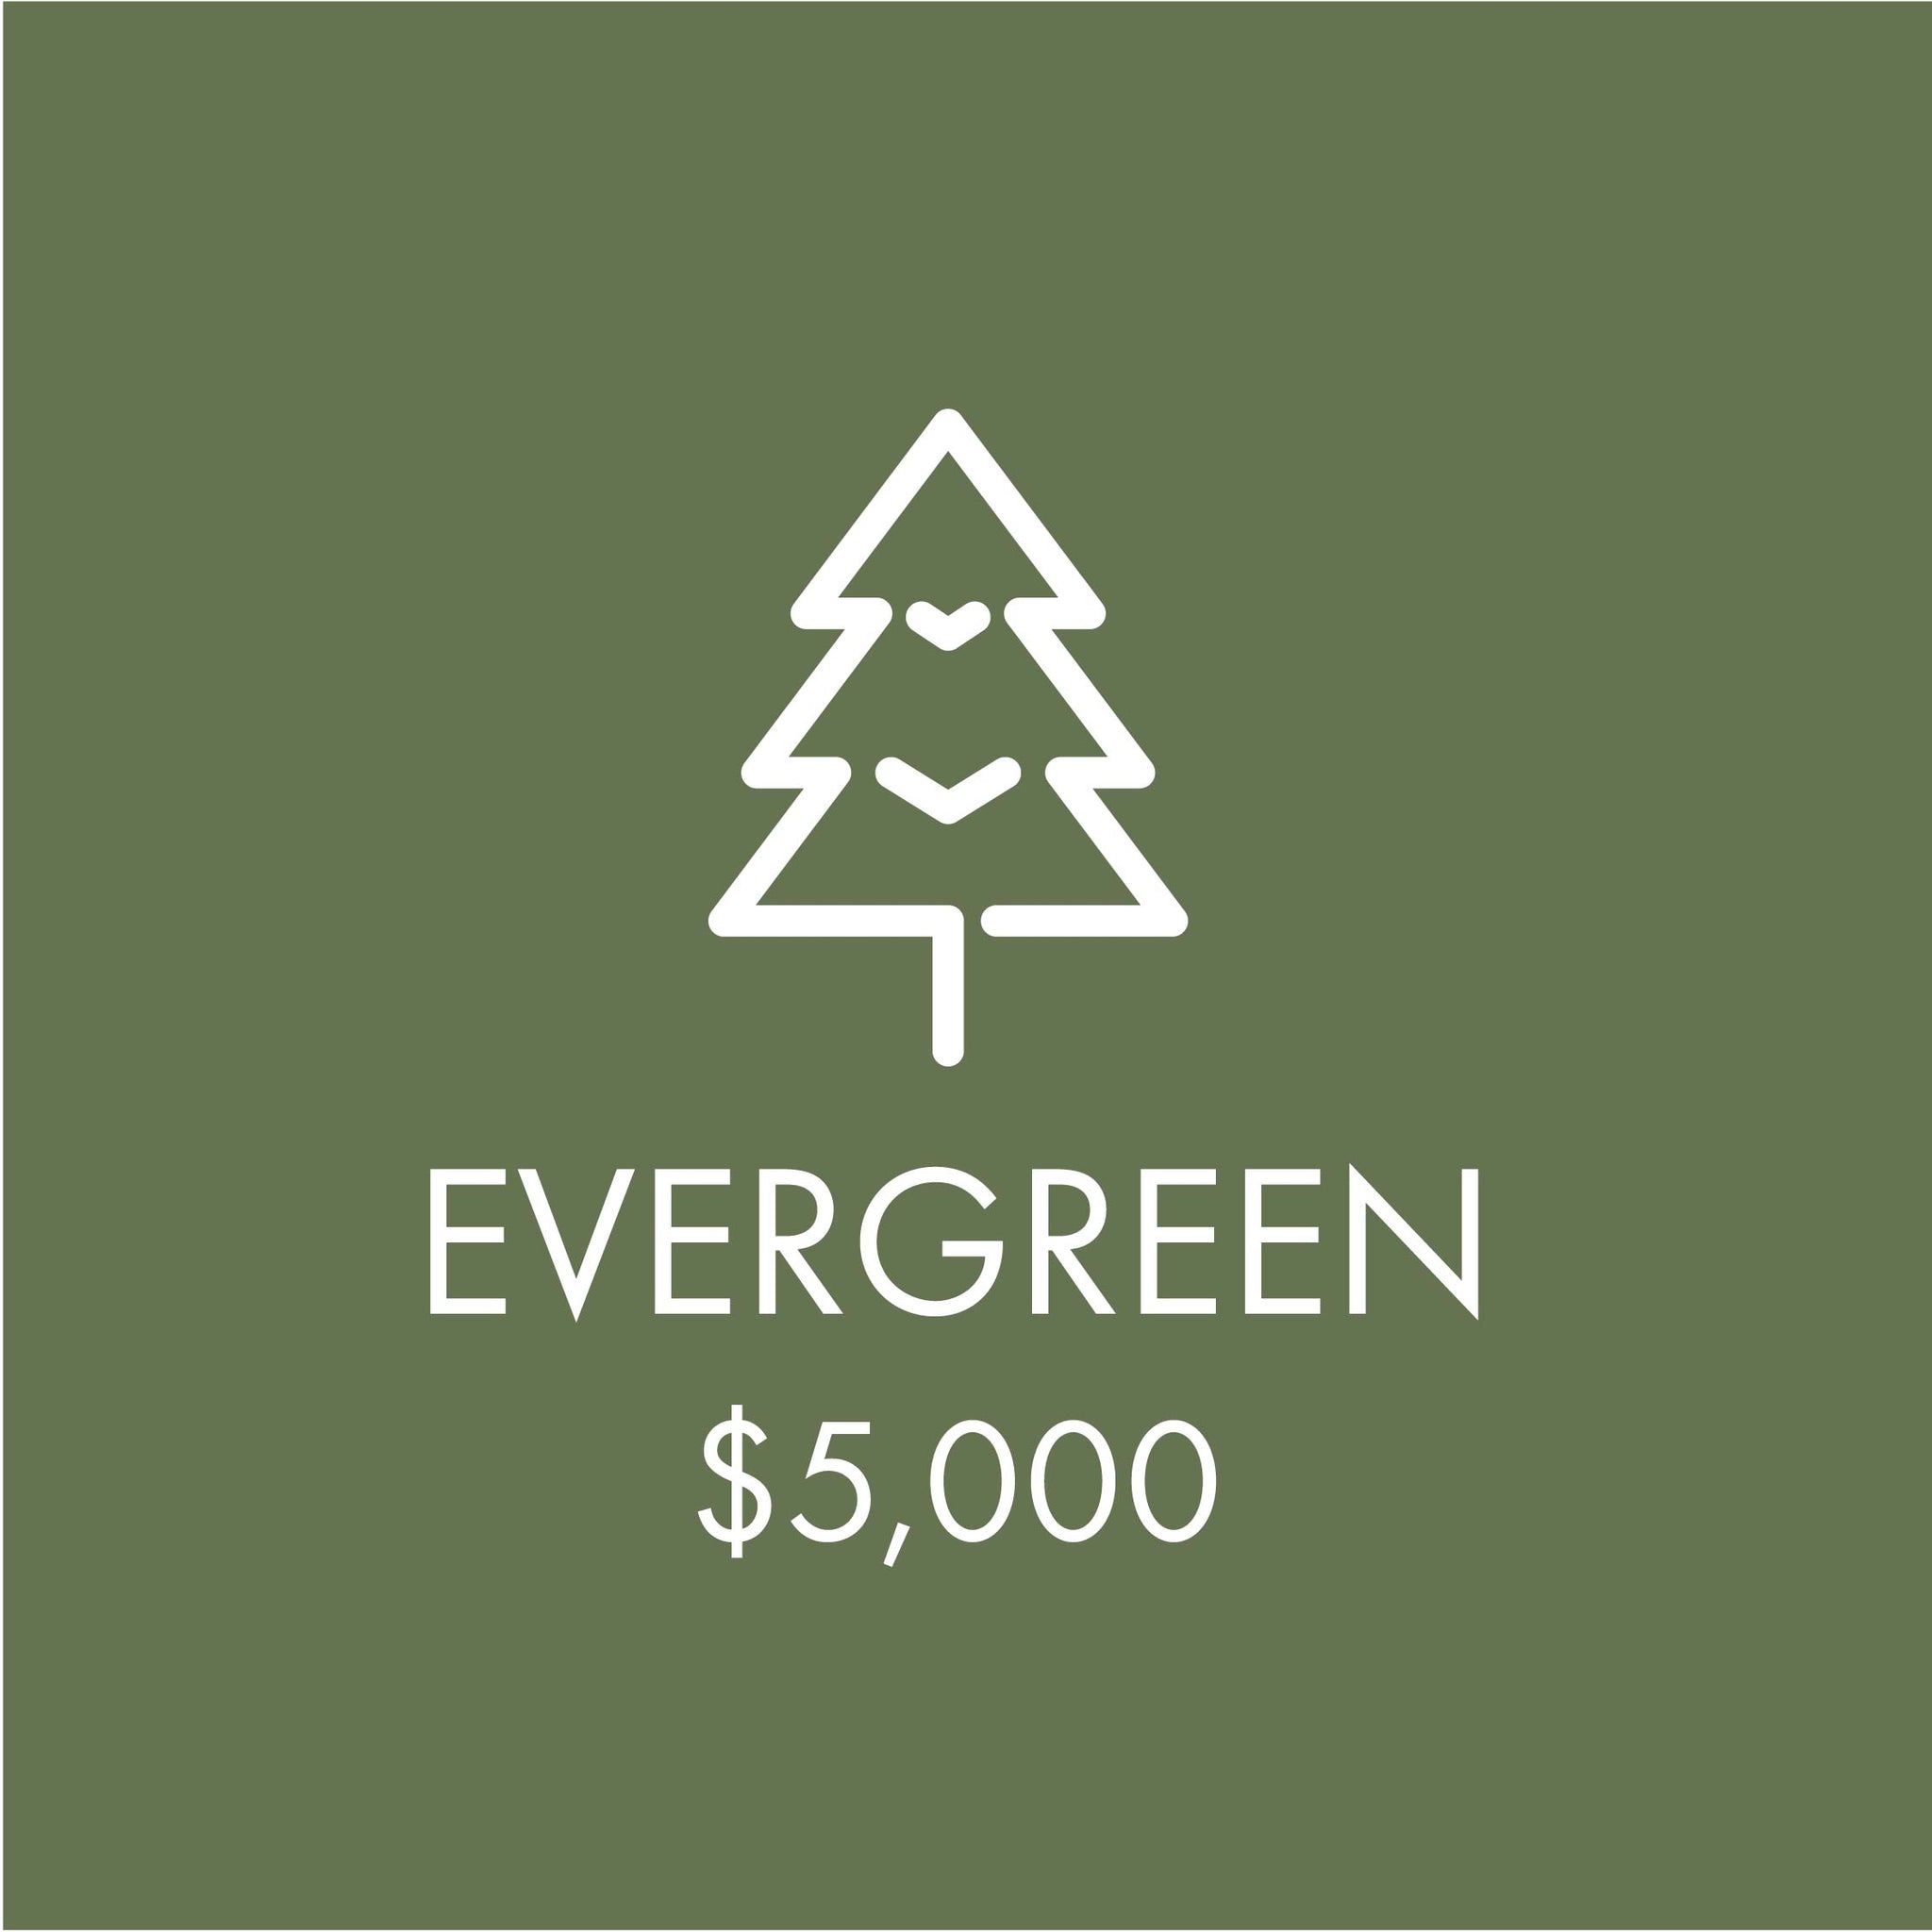 Support LongHouse - Evergreen $5,000